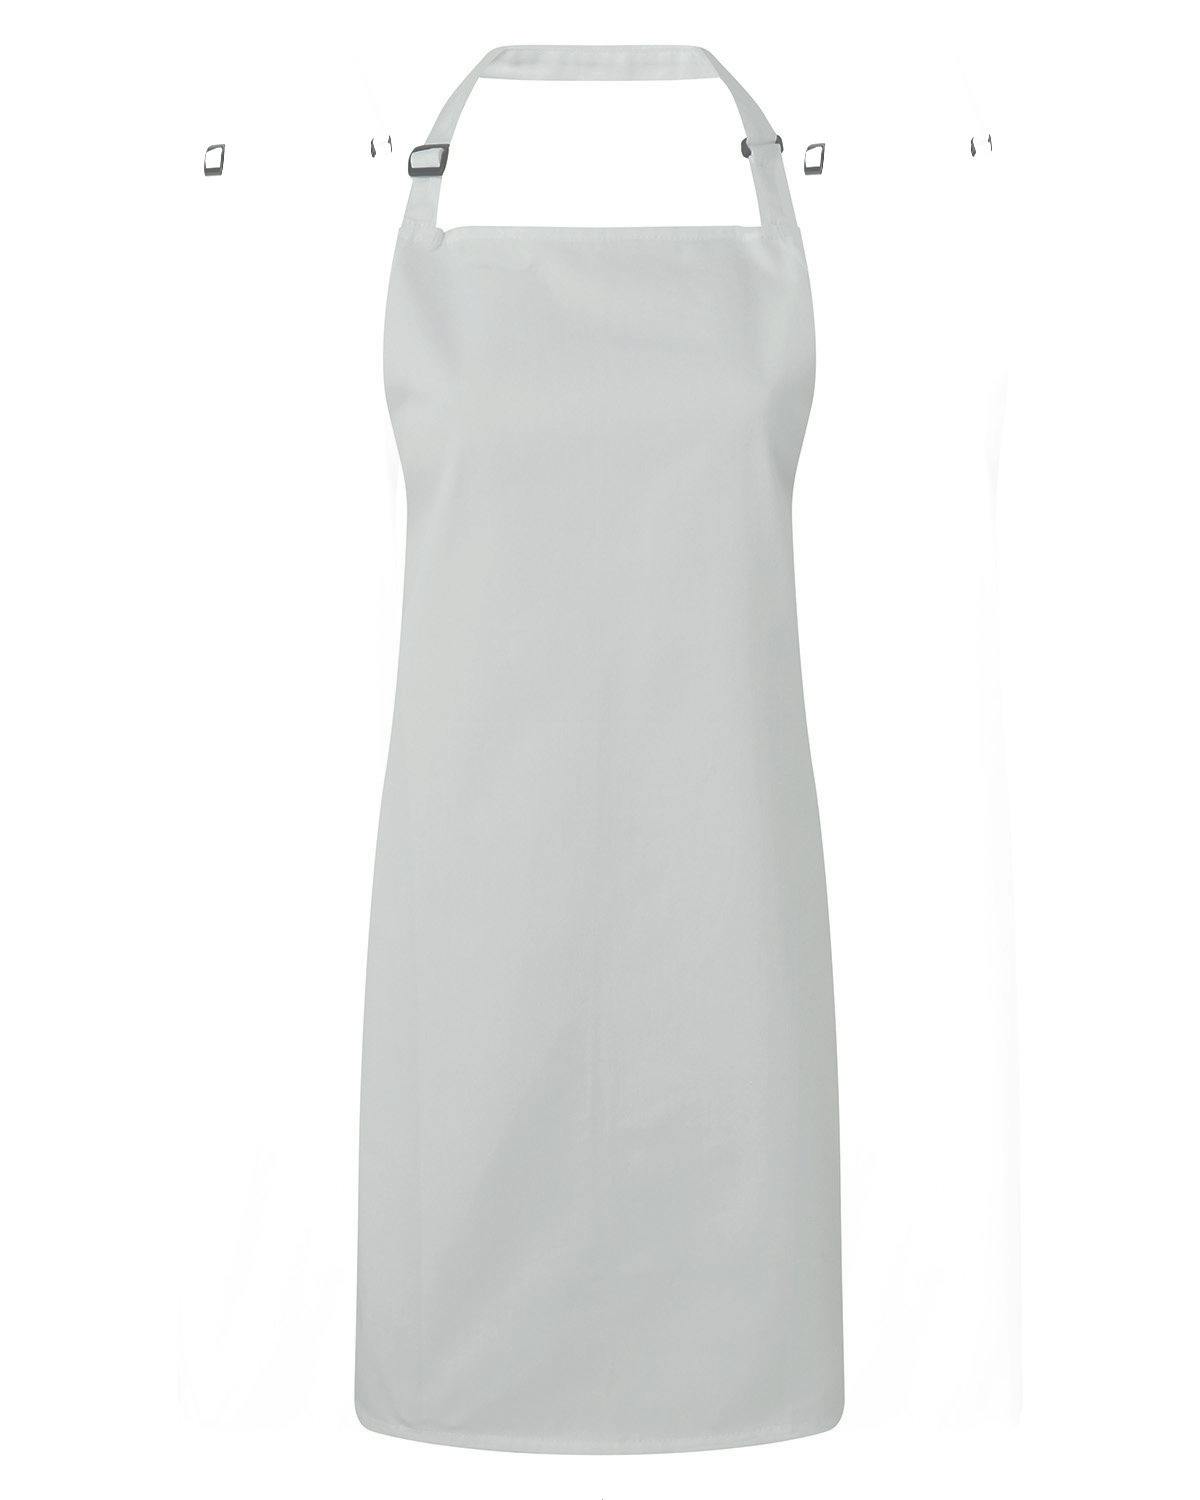 Image for Unisex 'Colours' Recycled Bib Apron